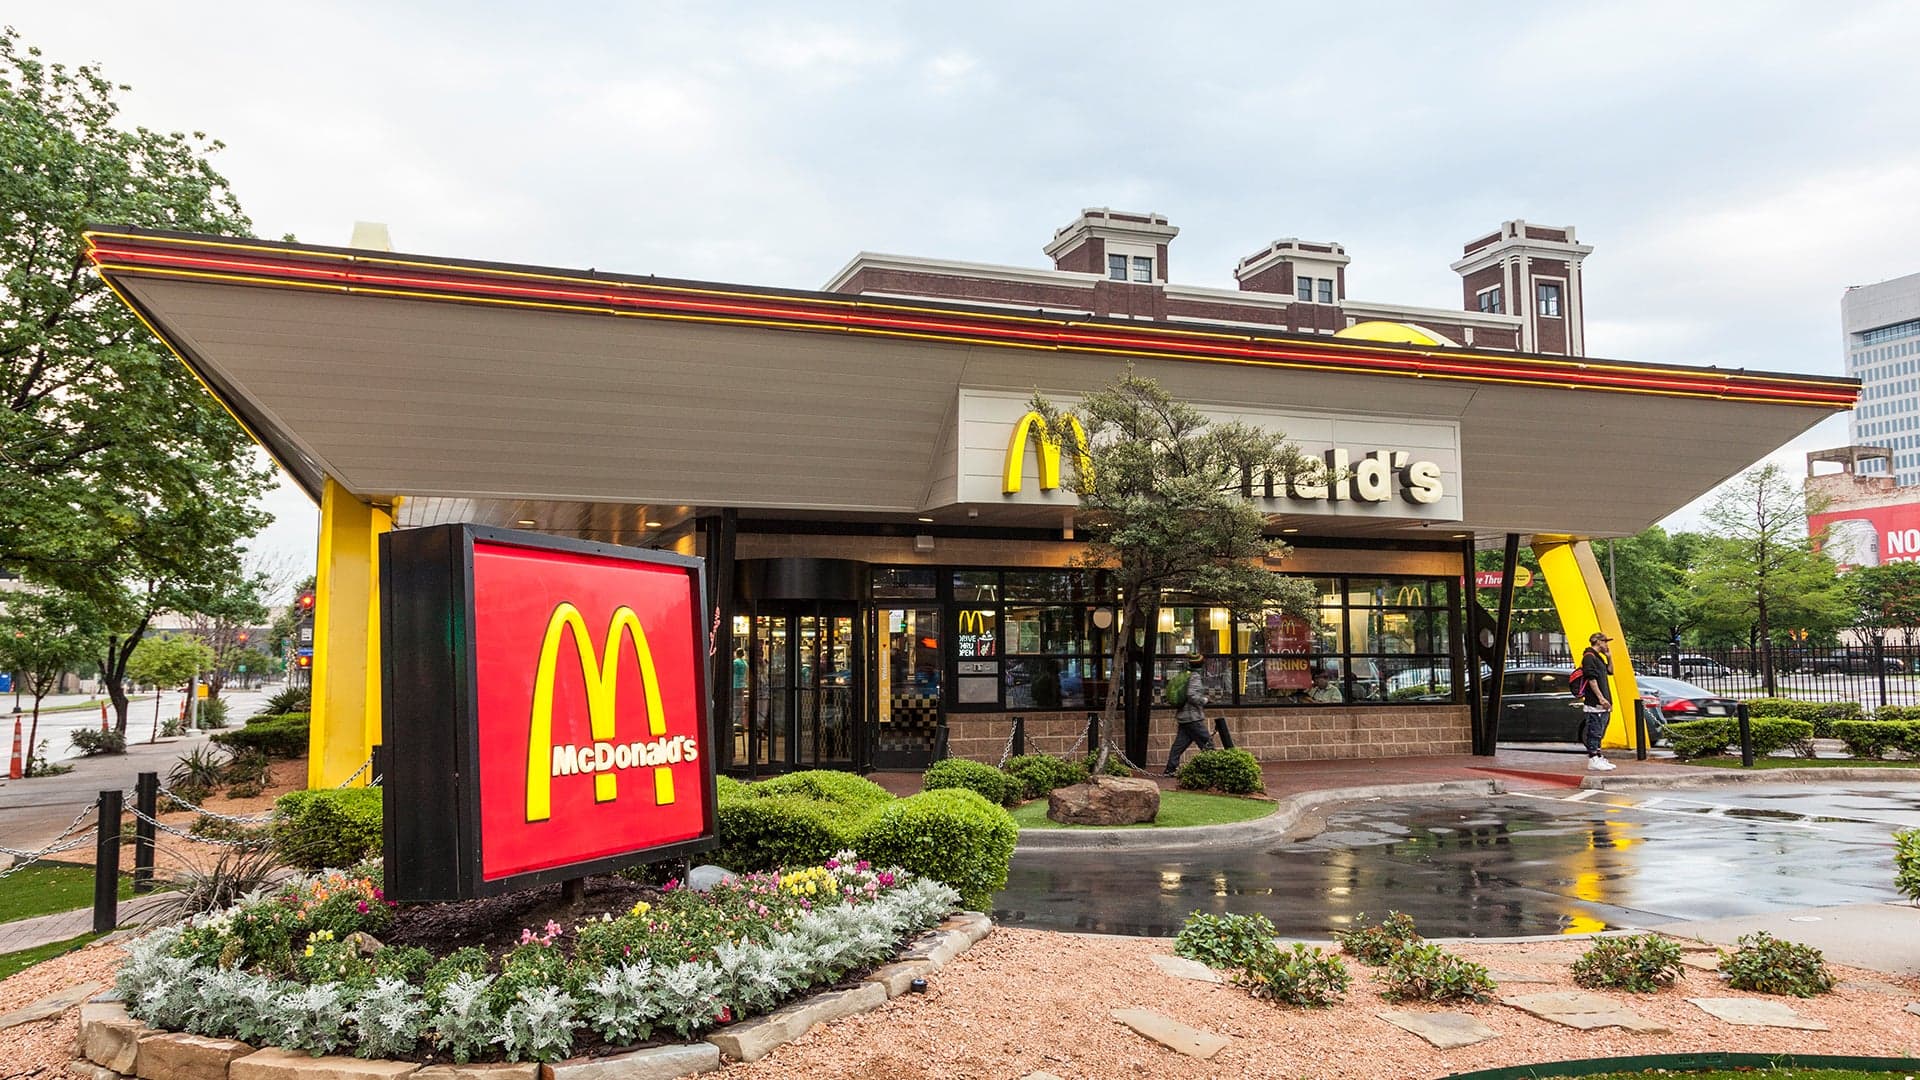 8-Year-Old Steals Car, Drives to McDonald’s After Watching YouTube Driving Tutorials